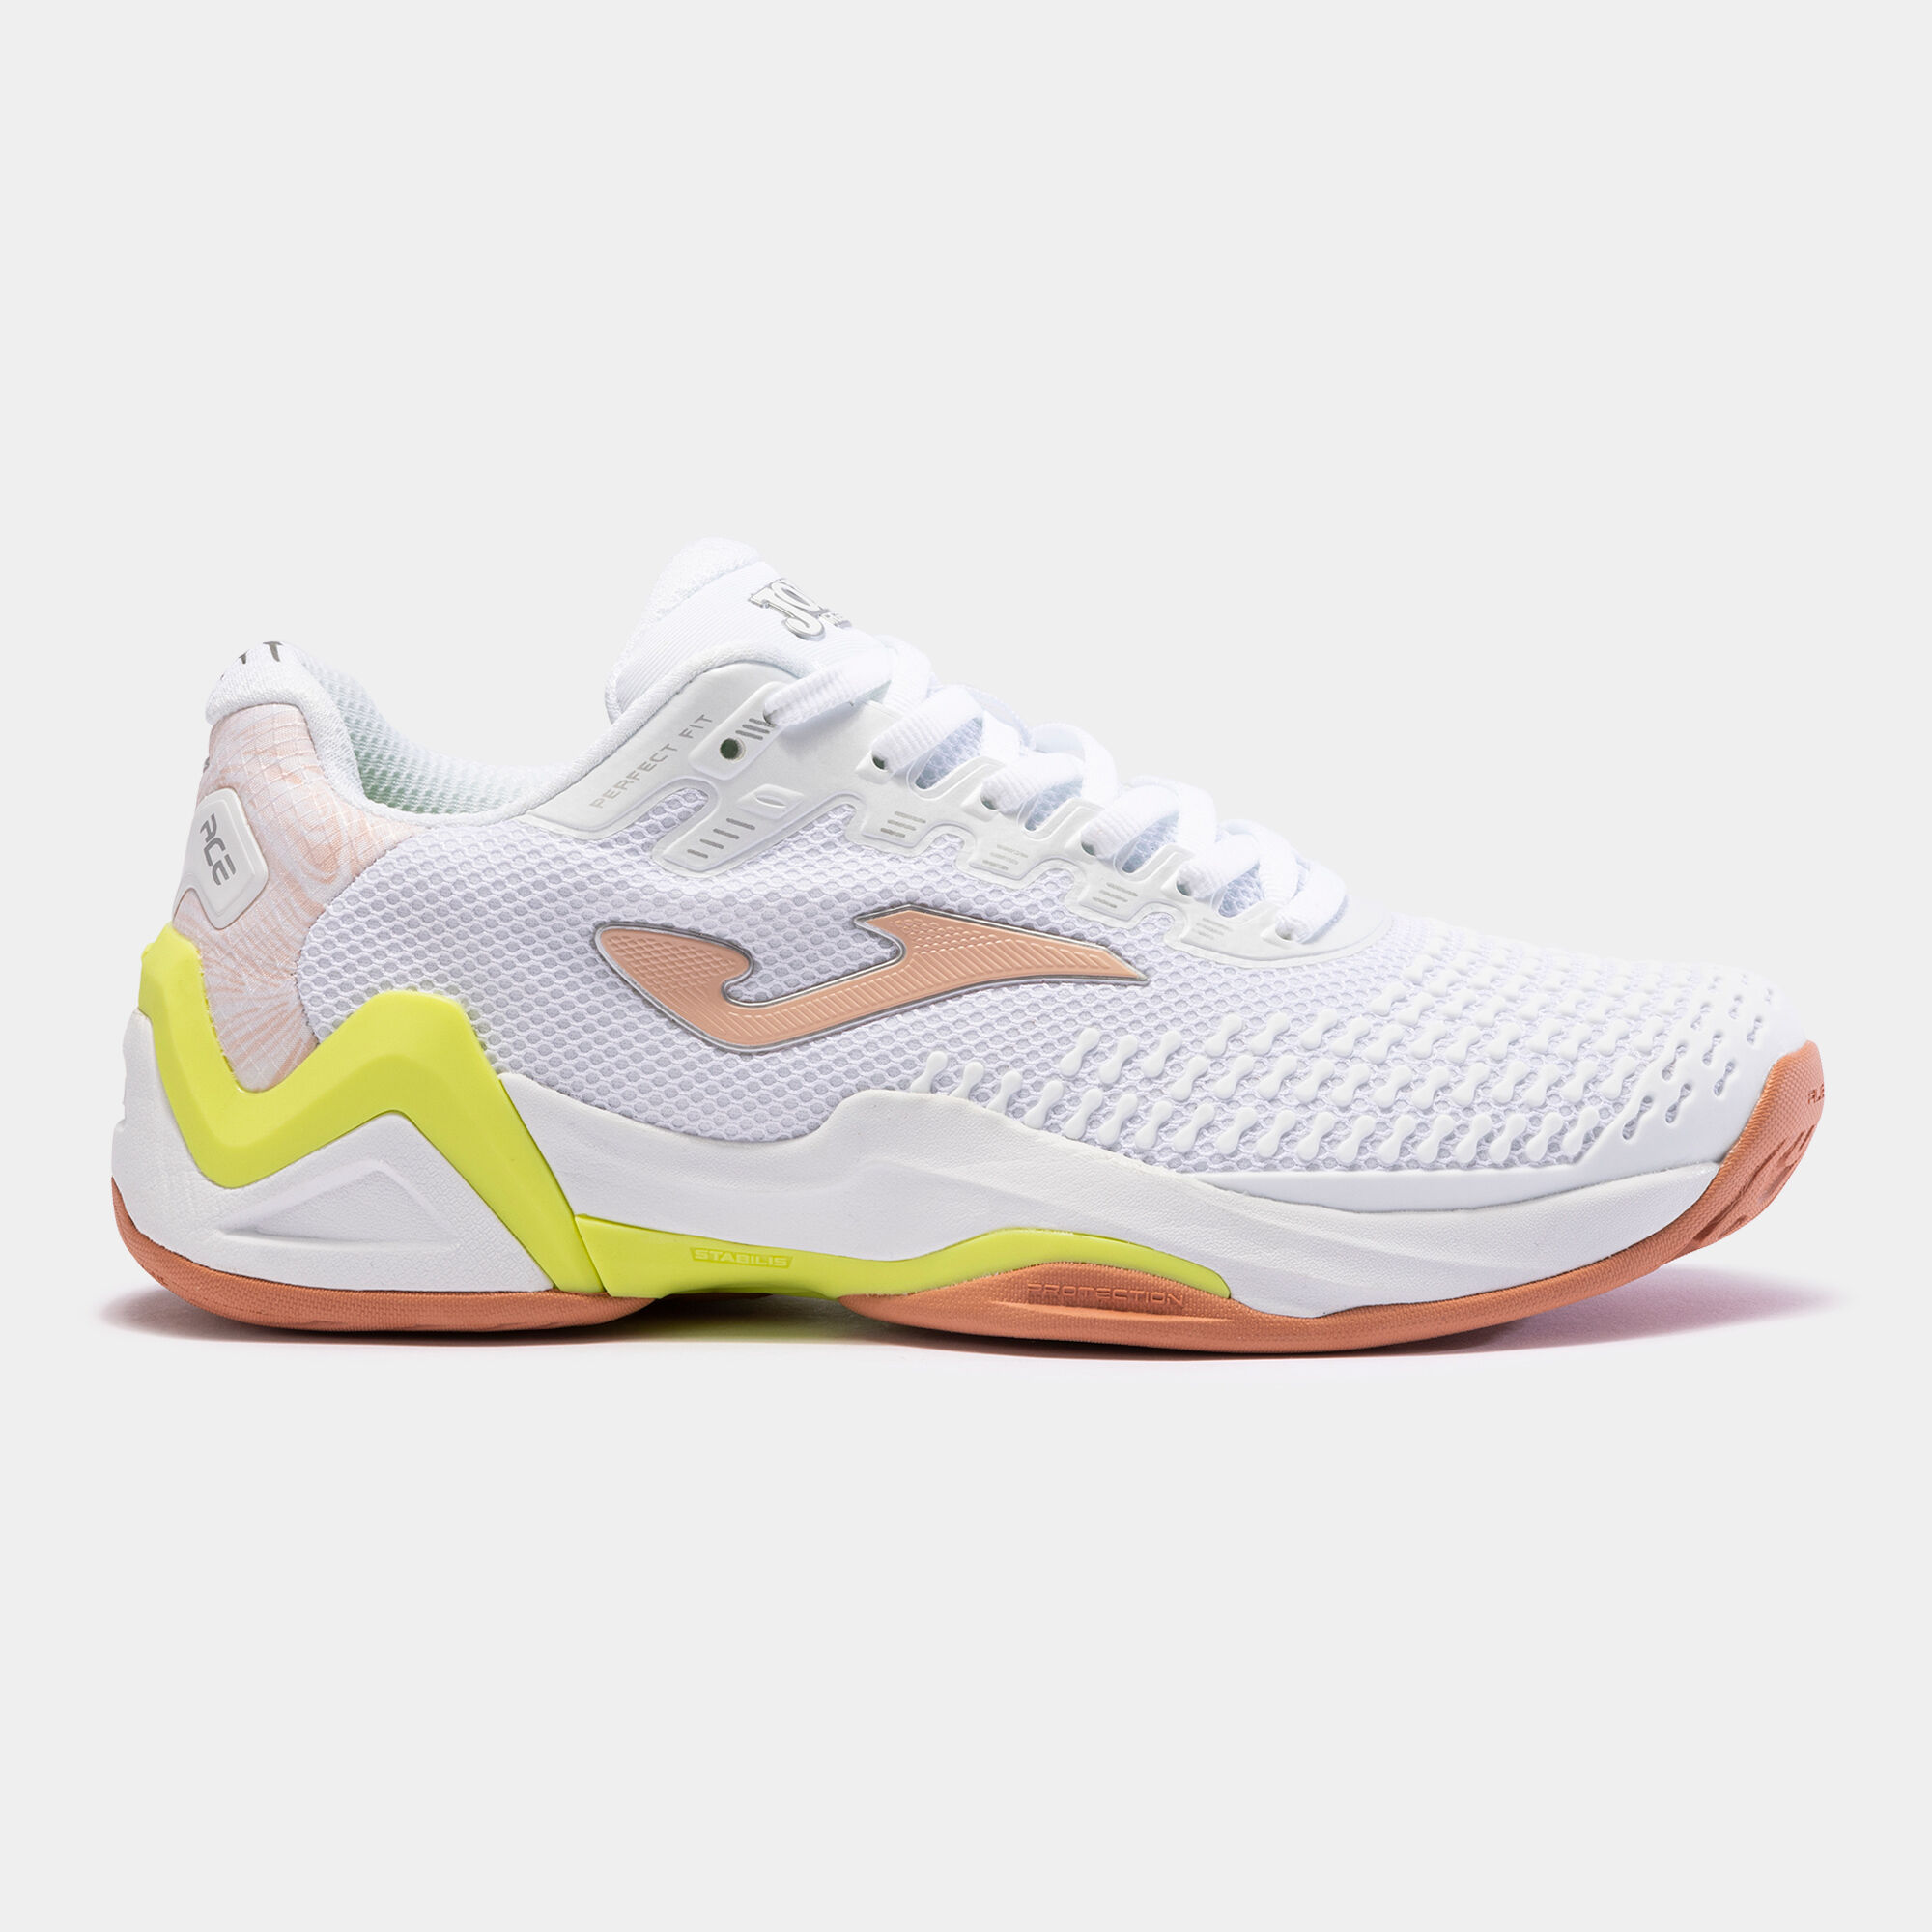 SHOES T.ACE LADY 23 HARD COURT WOMAN WHITE